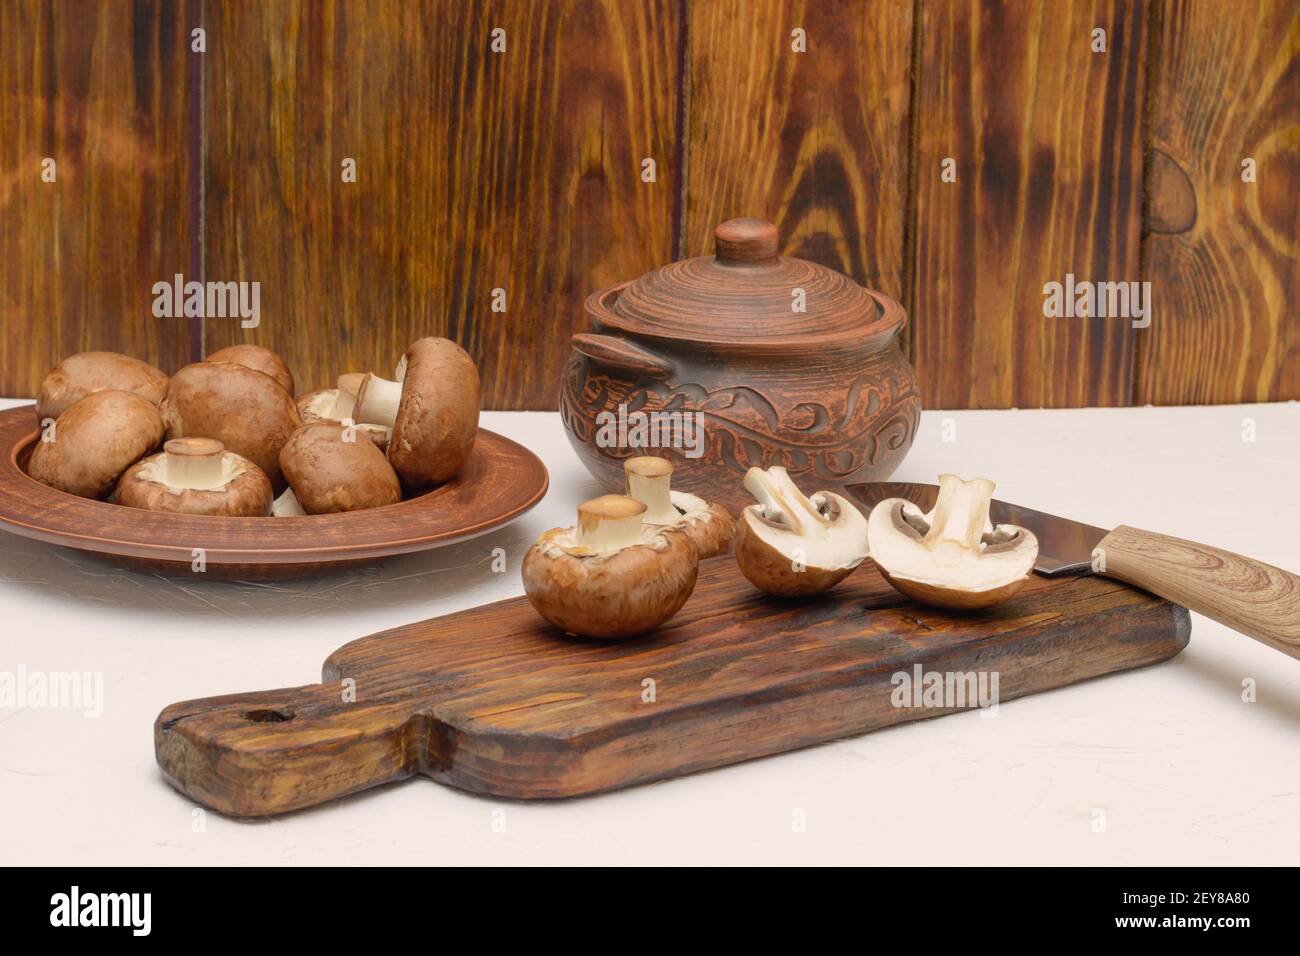 Process of cooking mushrooms. Royal brown champignons sliced on wooden cutting board. Stock Photo